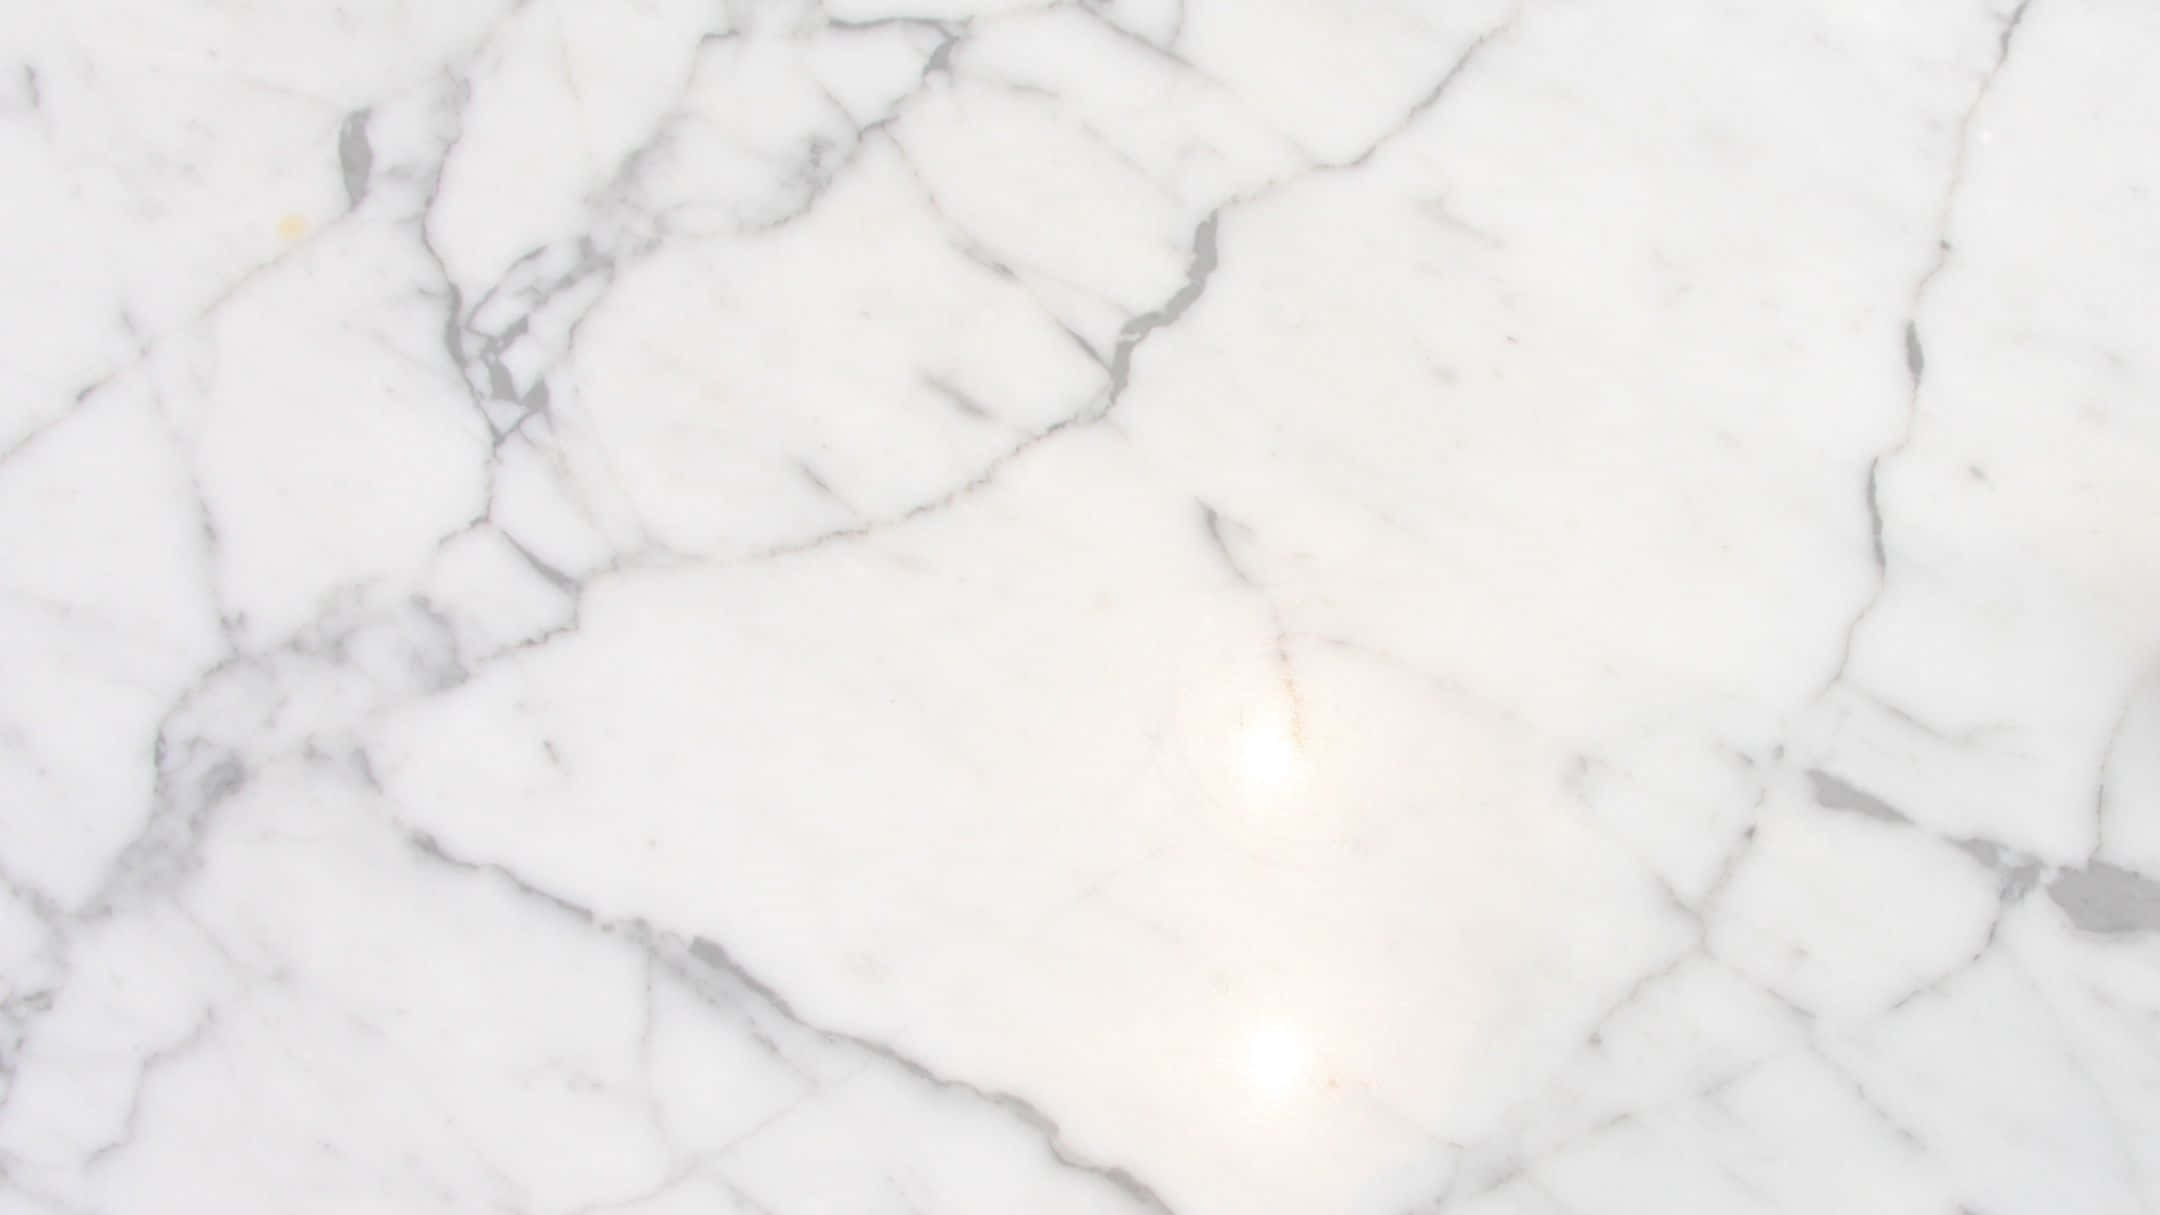 A White Marble Countertop With A White Marble Floor